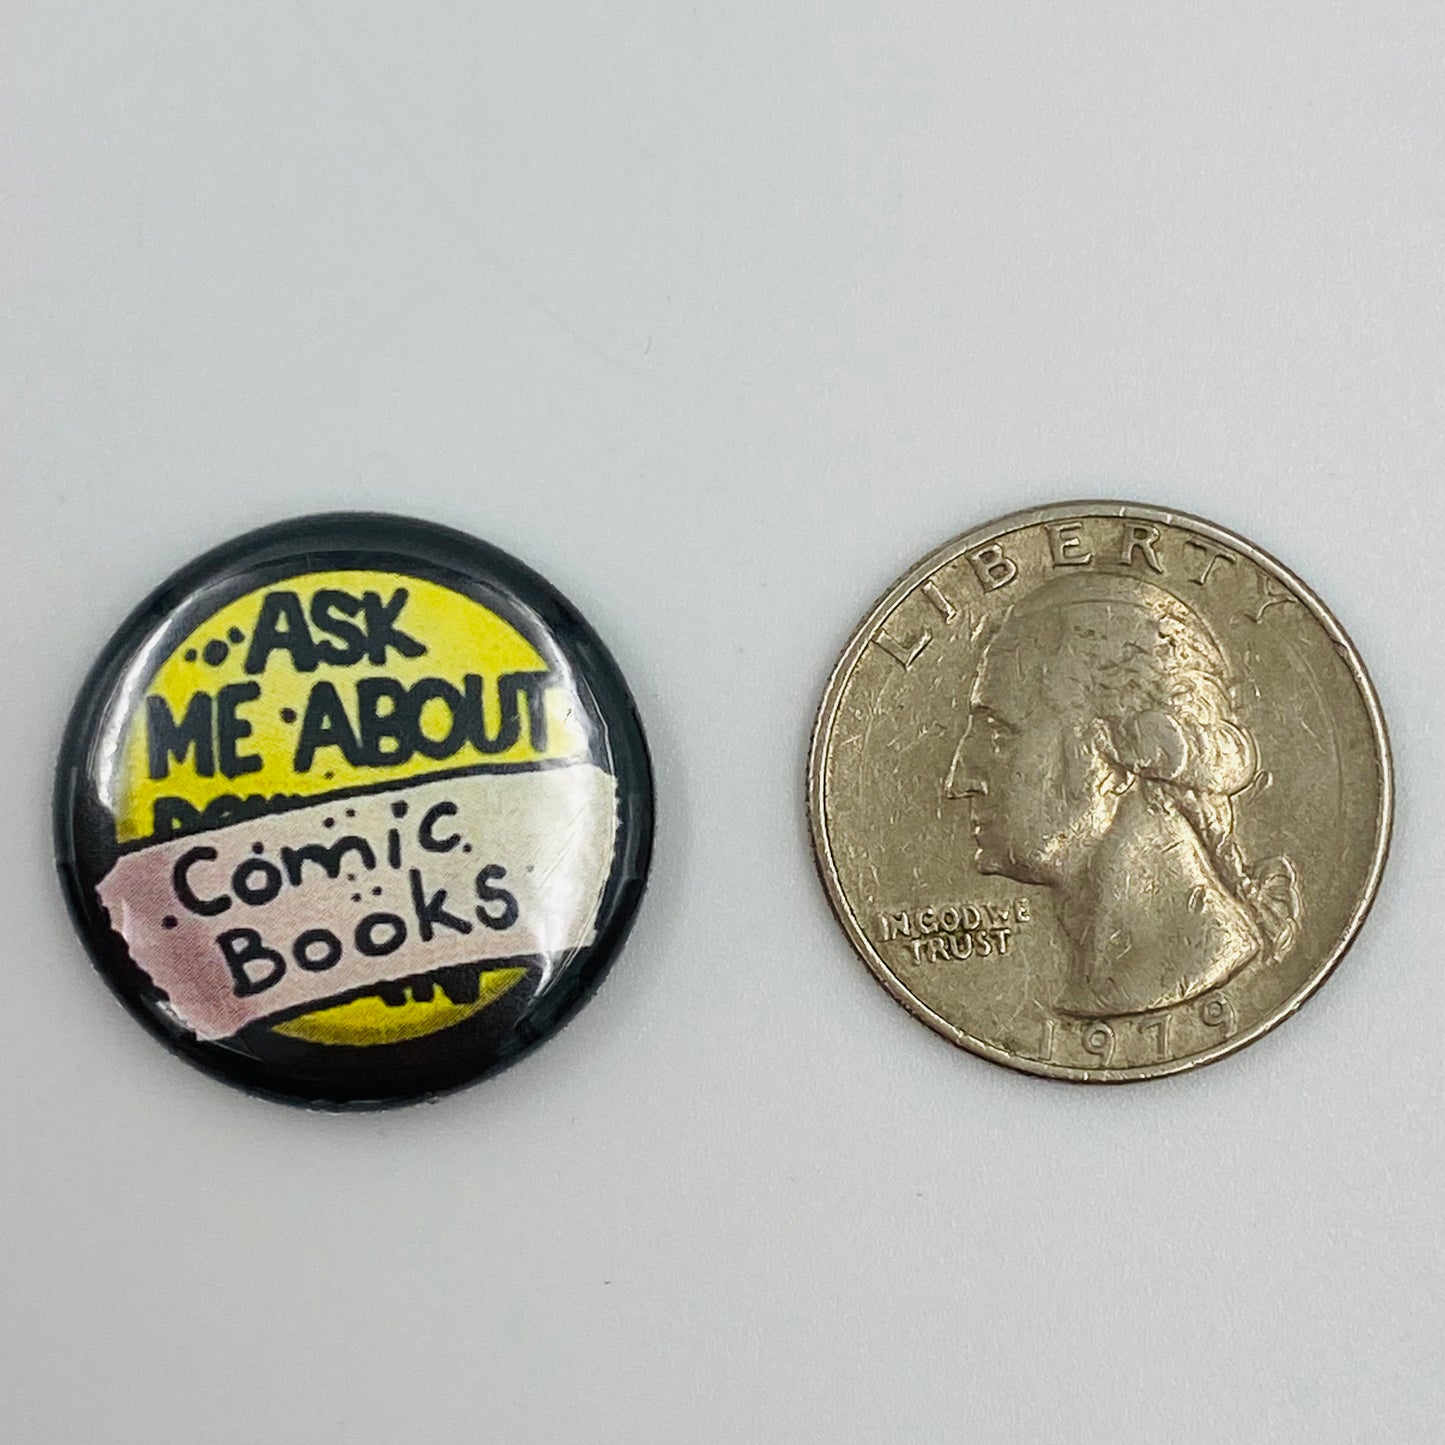 Ask Me About Comic Books pinback button